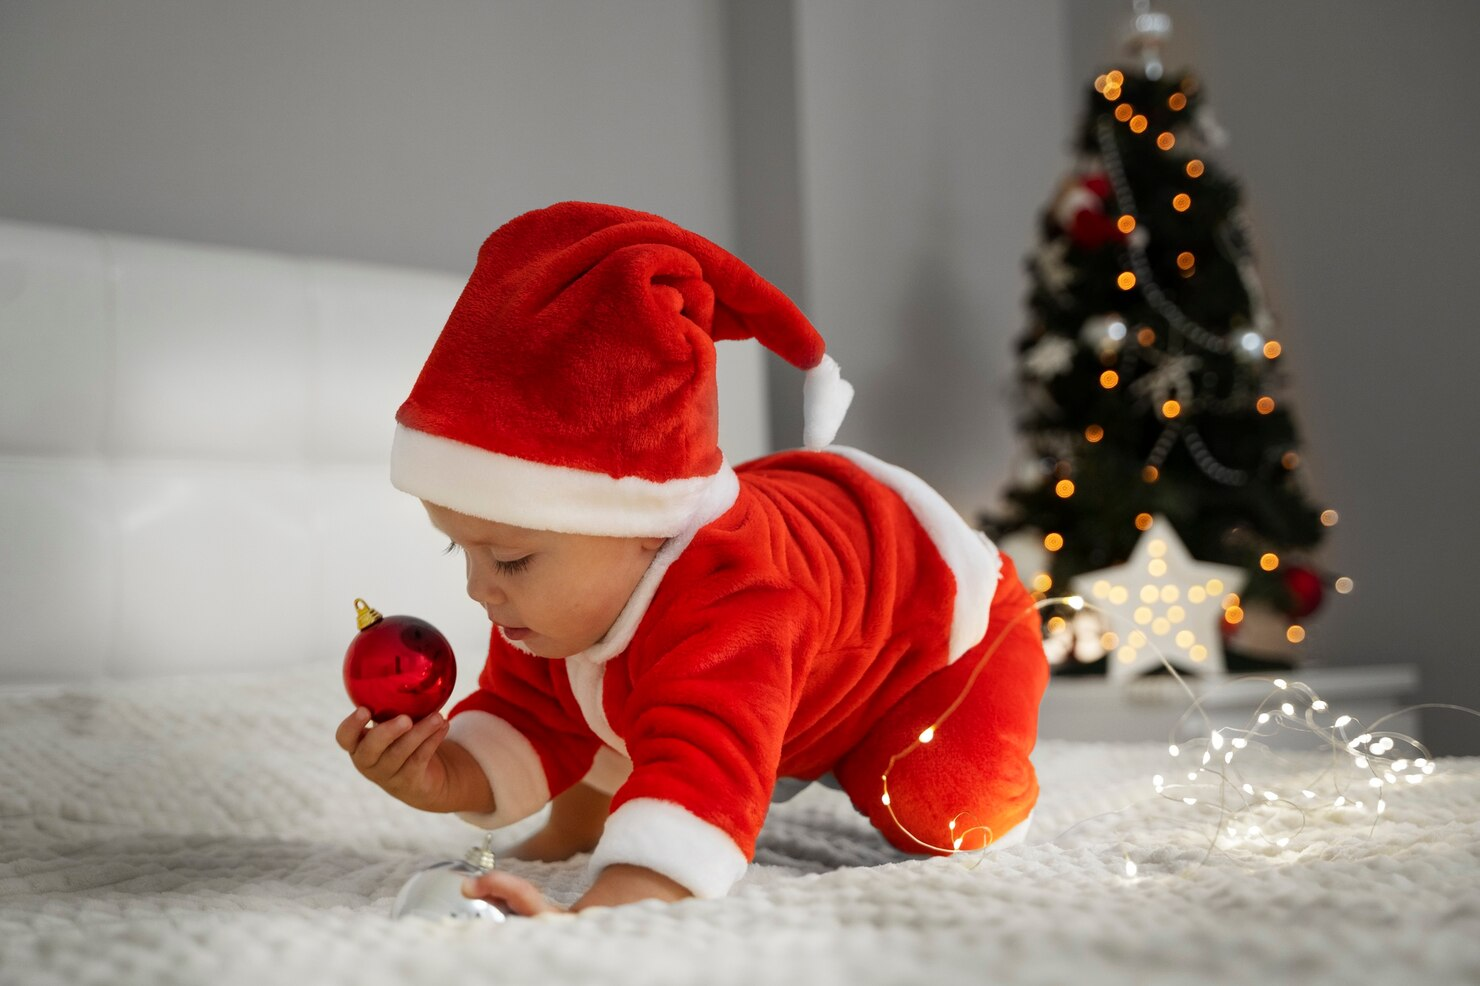 A baby playing with Christmas decorations.